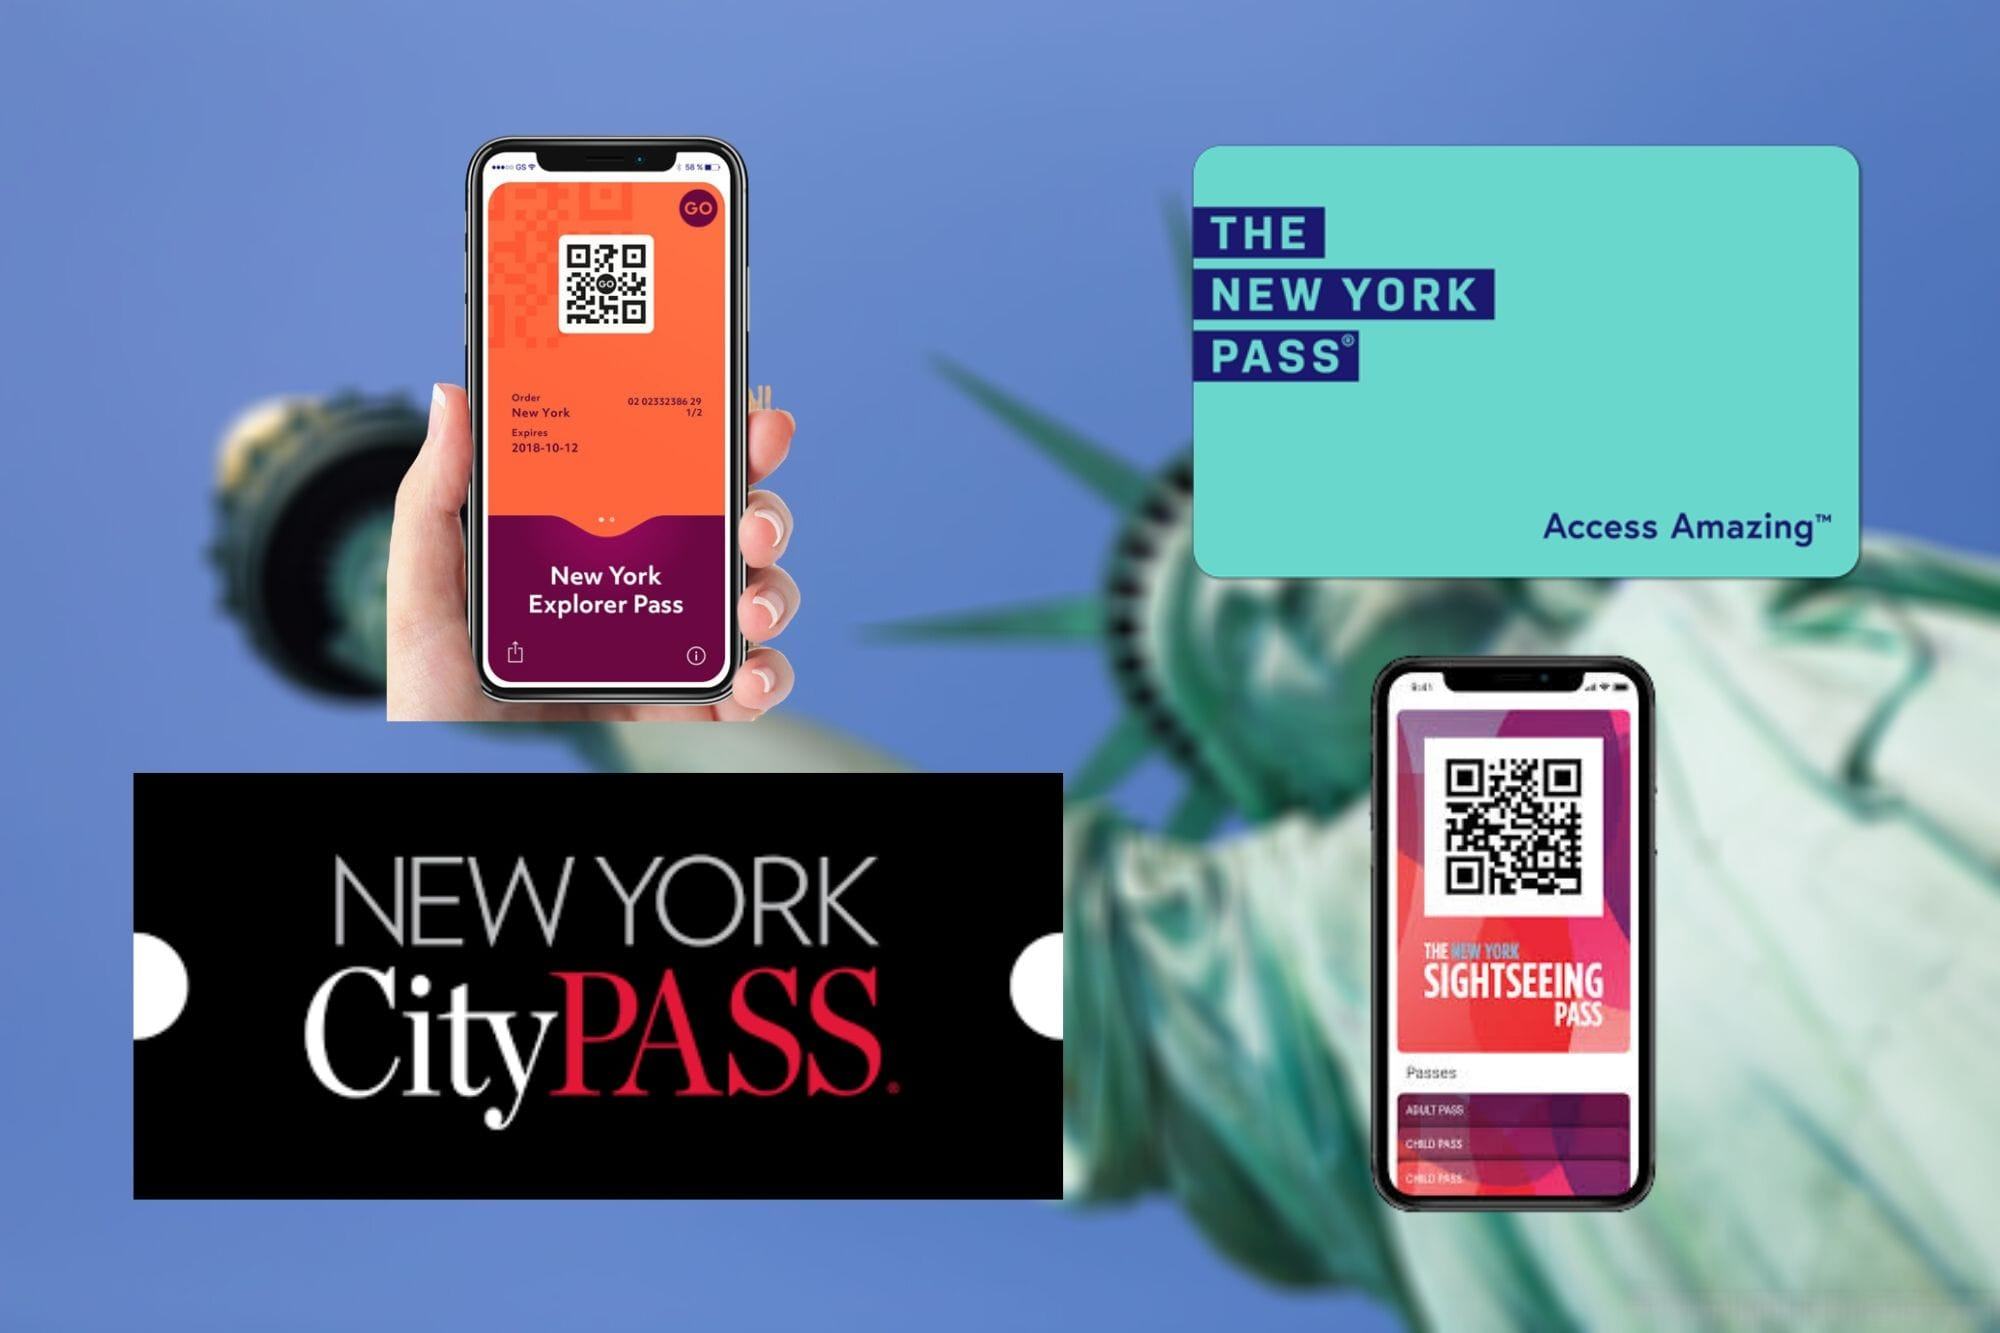 New York City Passes: Which New York Attraction Pass is Best for You?